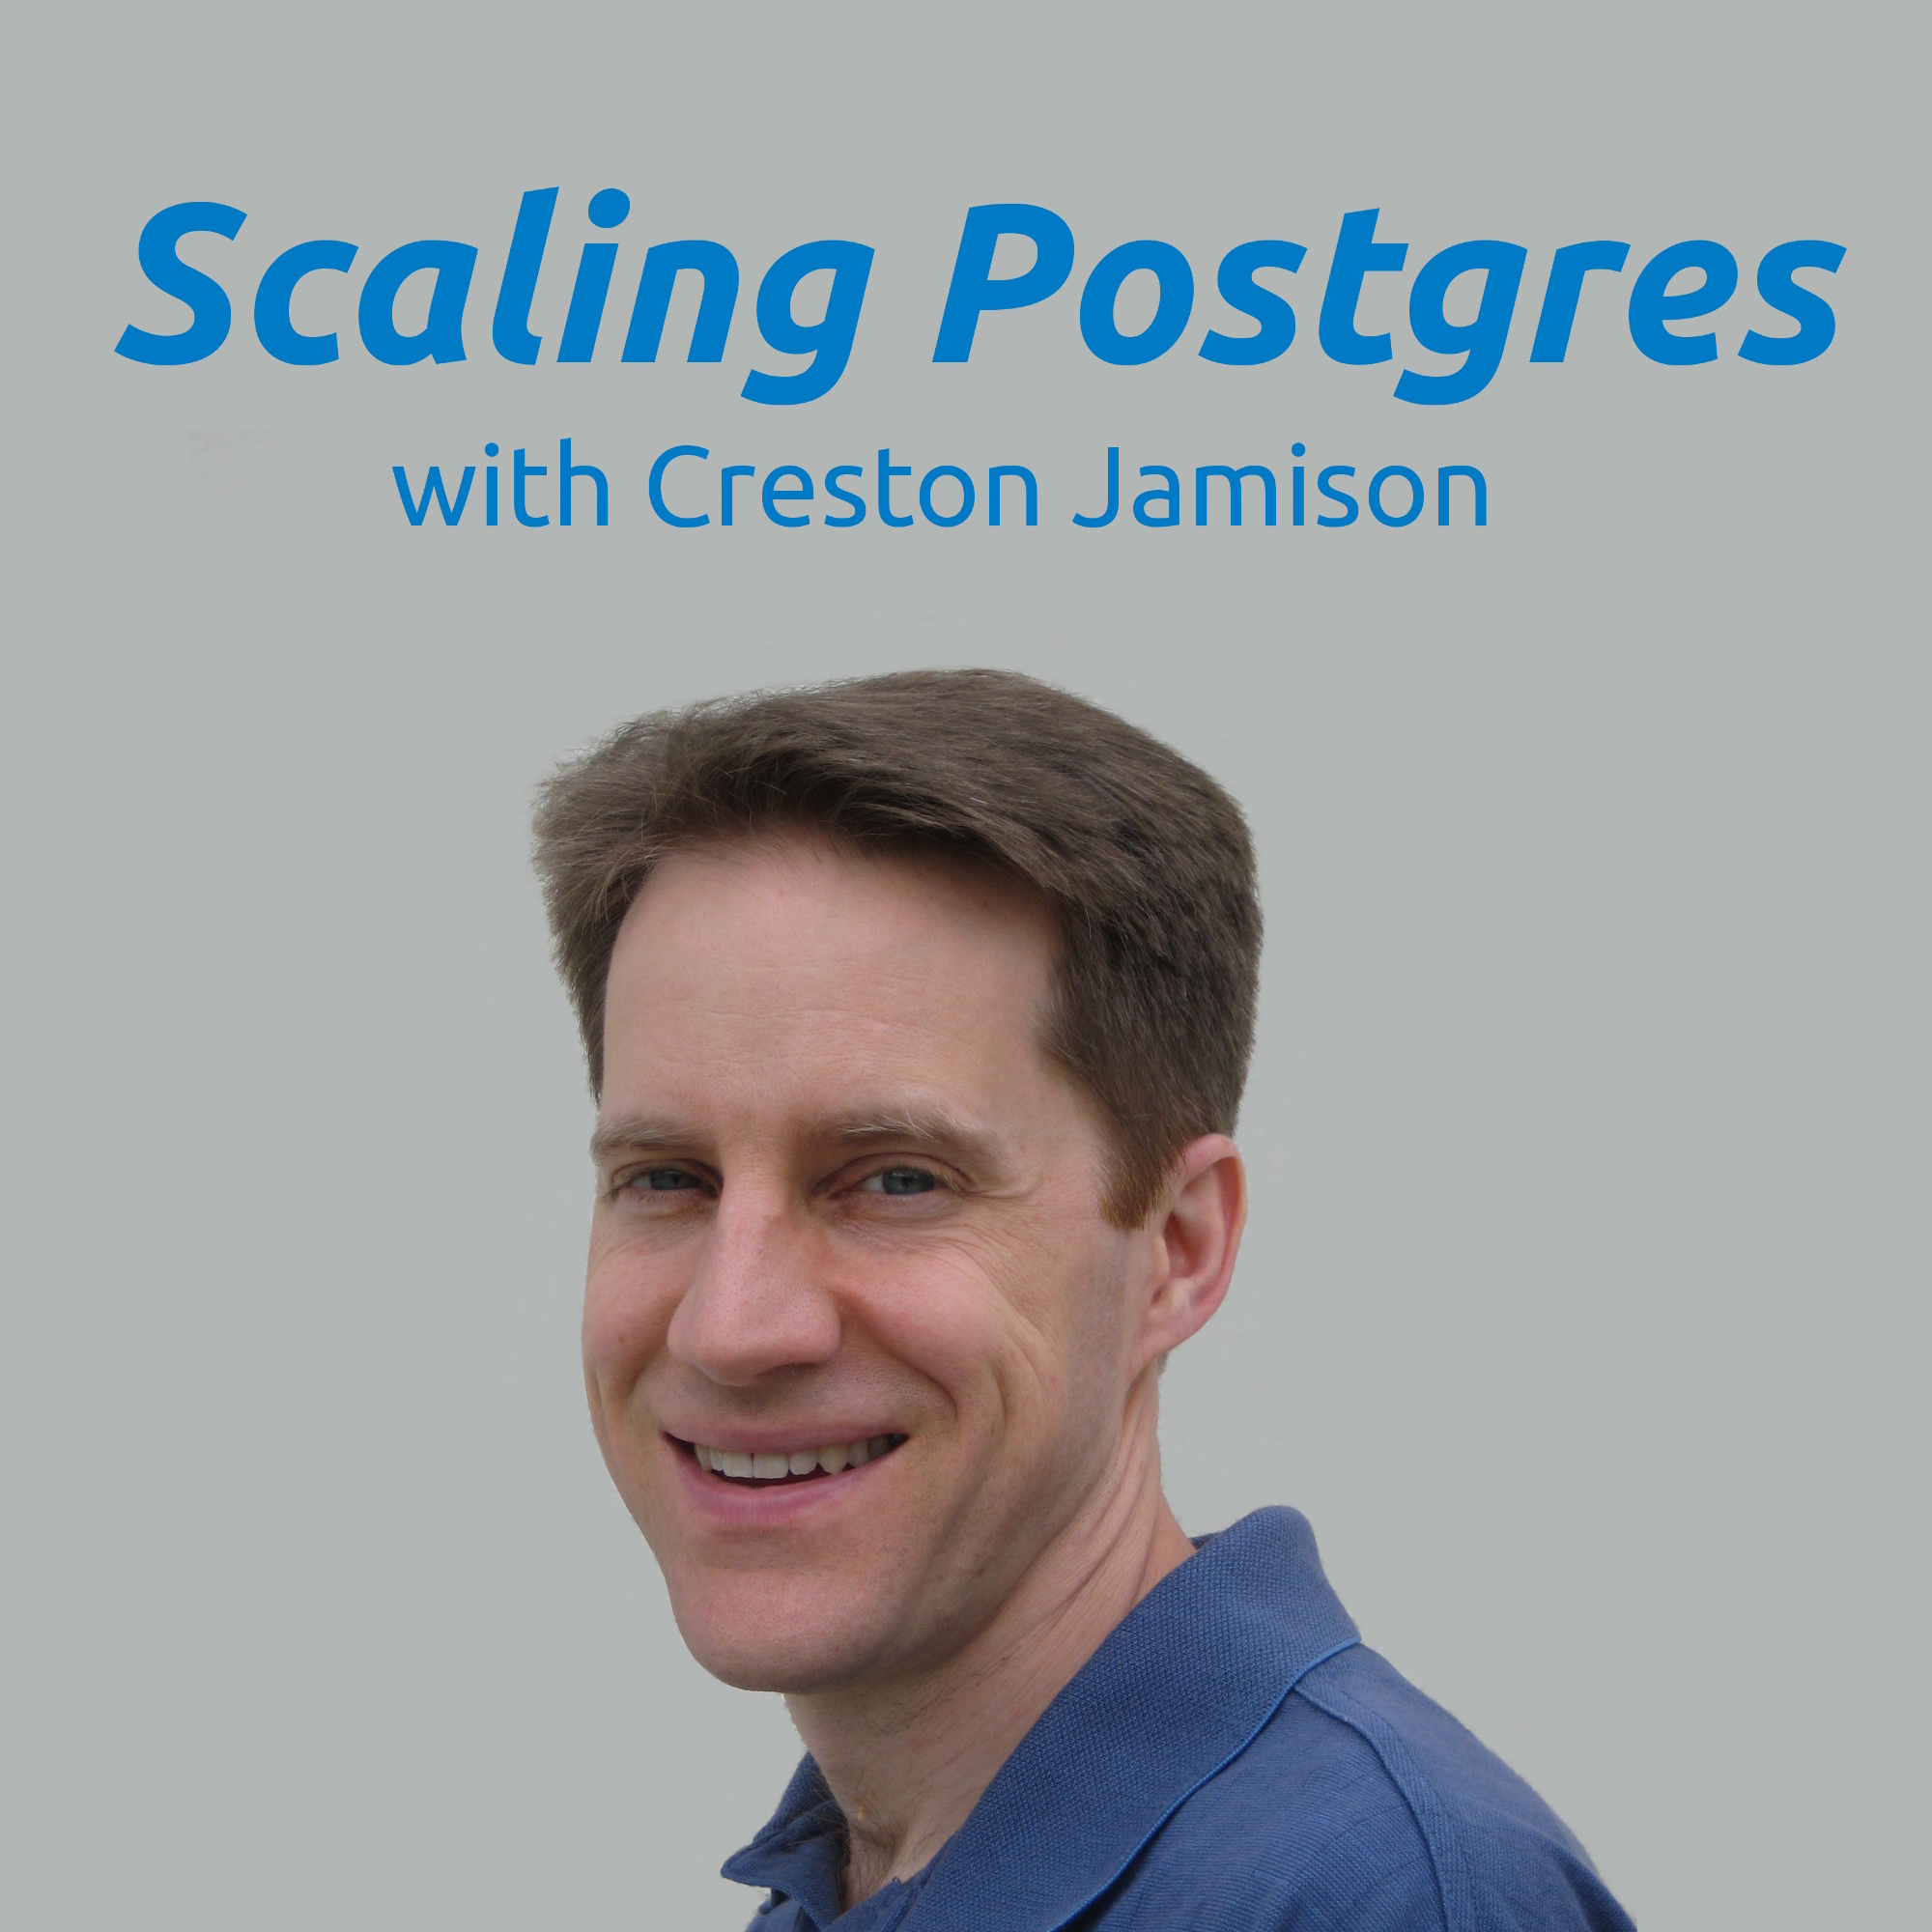 Showing Plans, Atomic, Configuration, Migrations | Scaling Postgres 107